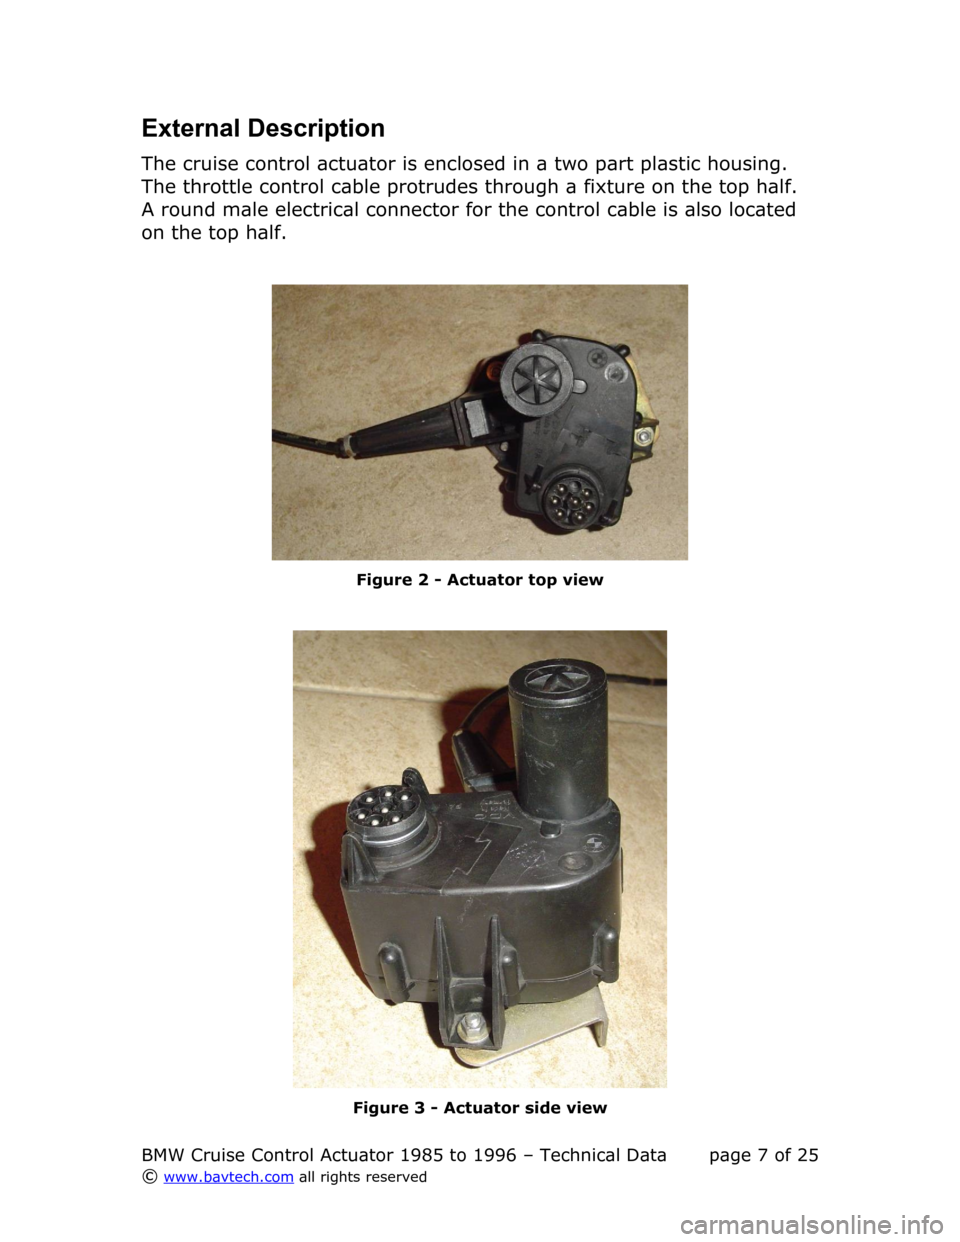 BMW 8 SERIES 1995 E31 Cruise Control Acutator External Description
The cruise control actuator is enclosed in a two part plastic housing.  
The throttle control cable protrudes through a fixture on the top half.  
A round male electrical connecto